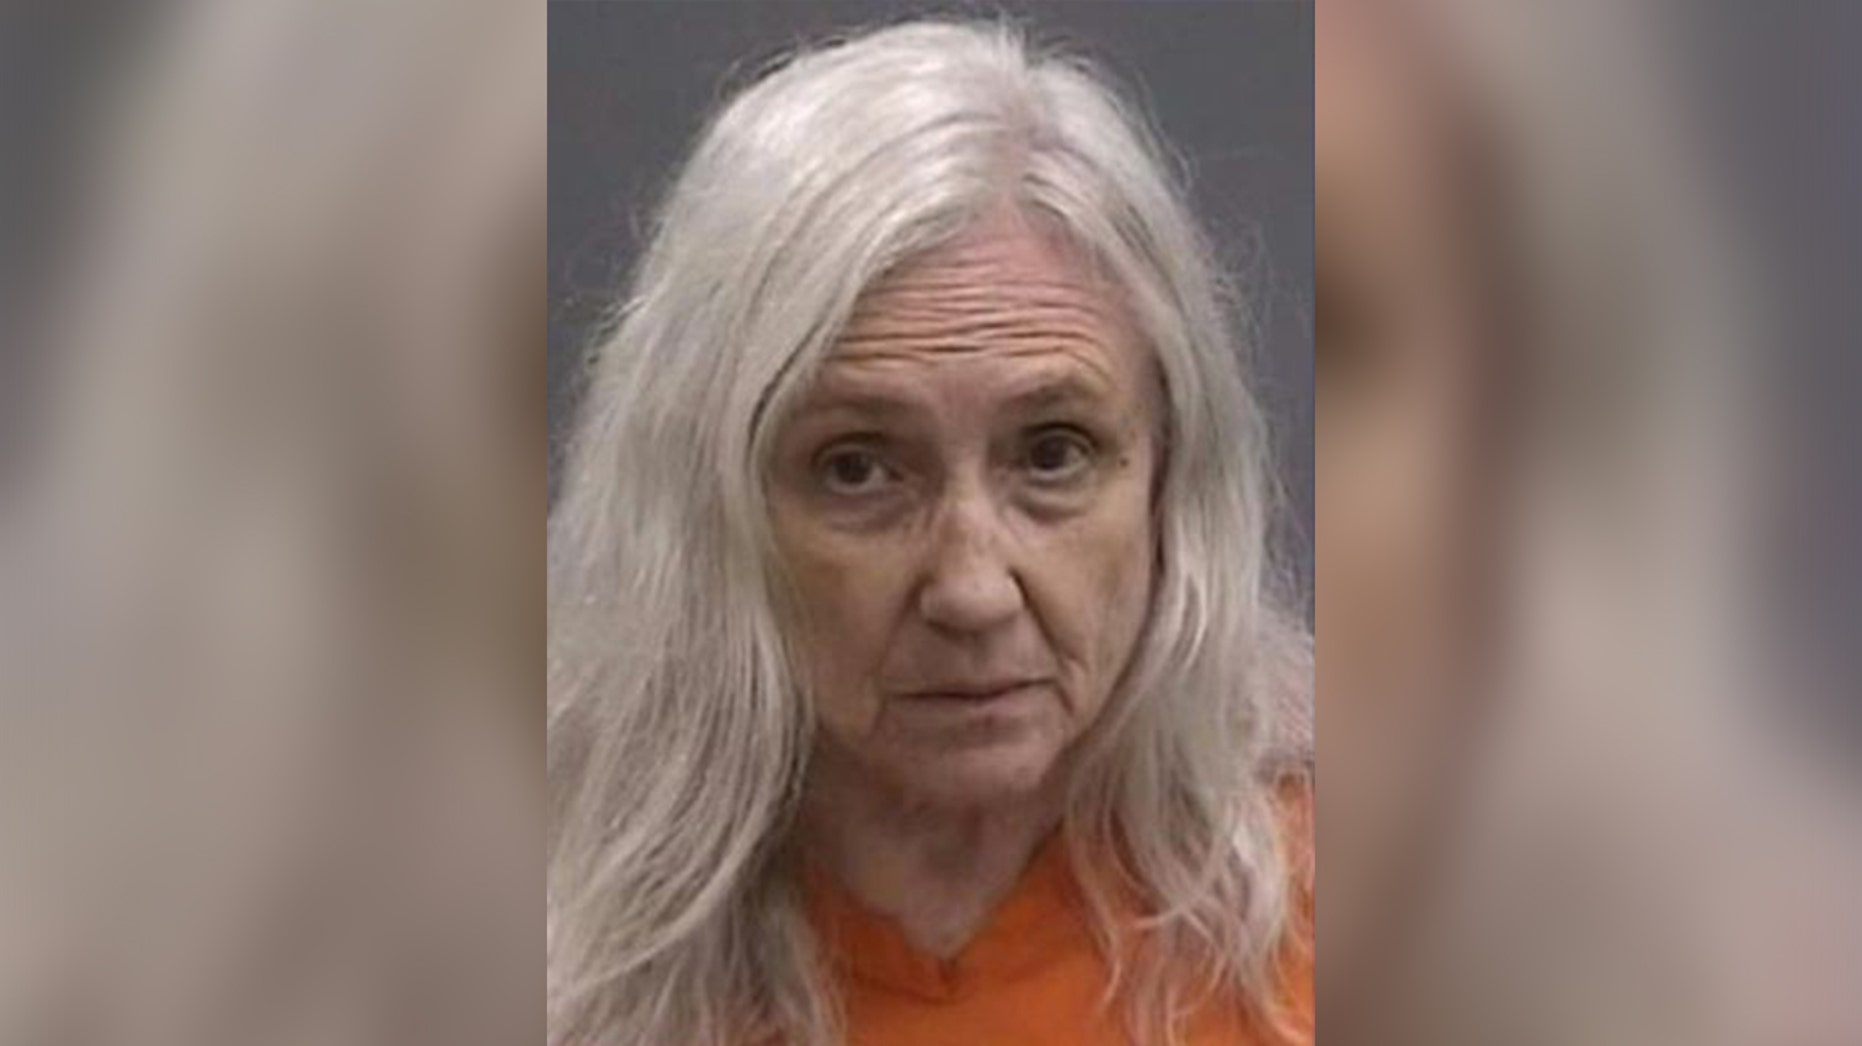 Woman allegedly shot roommate dead because he 'did not clean up after himself'